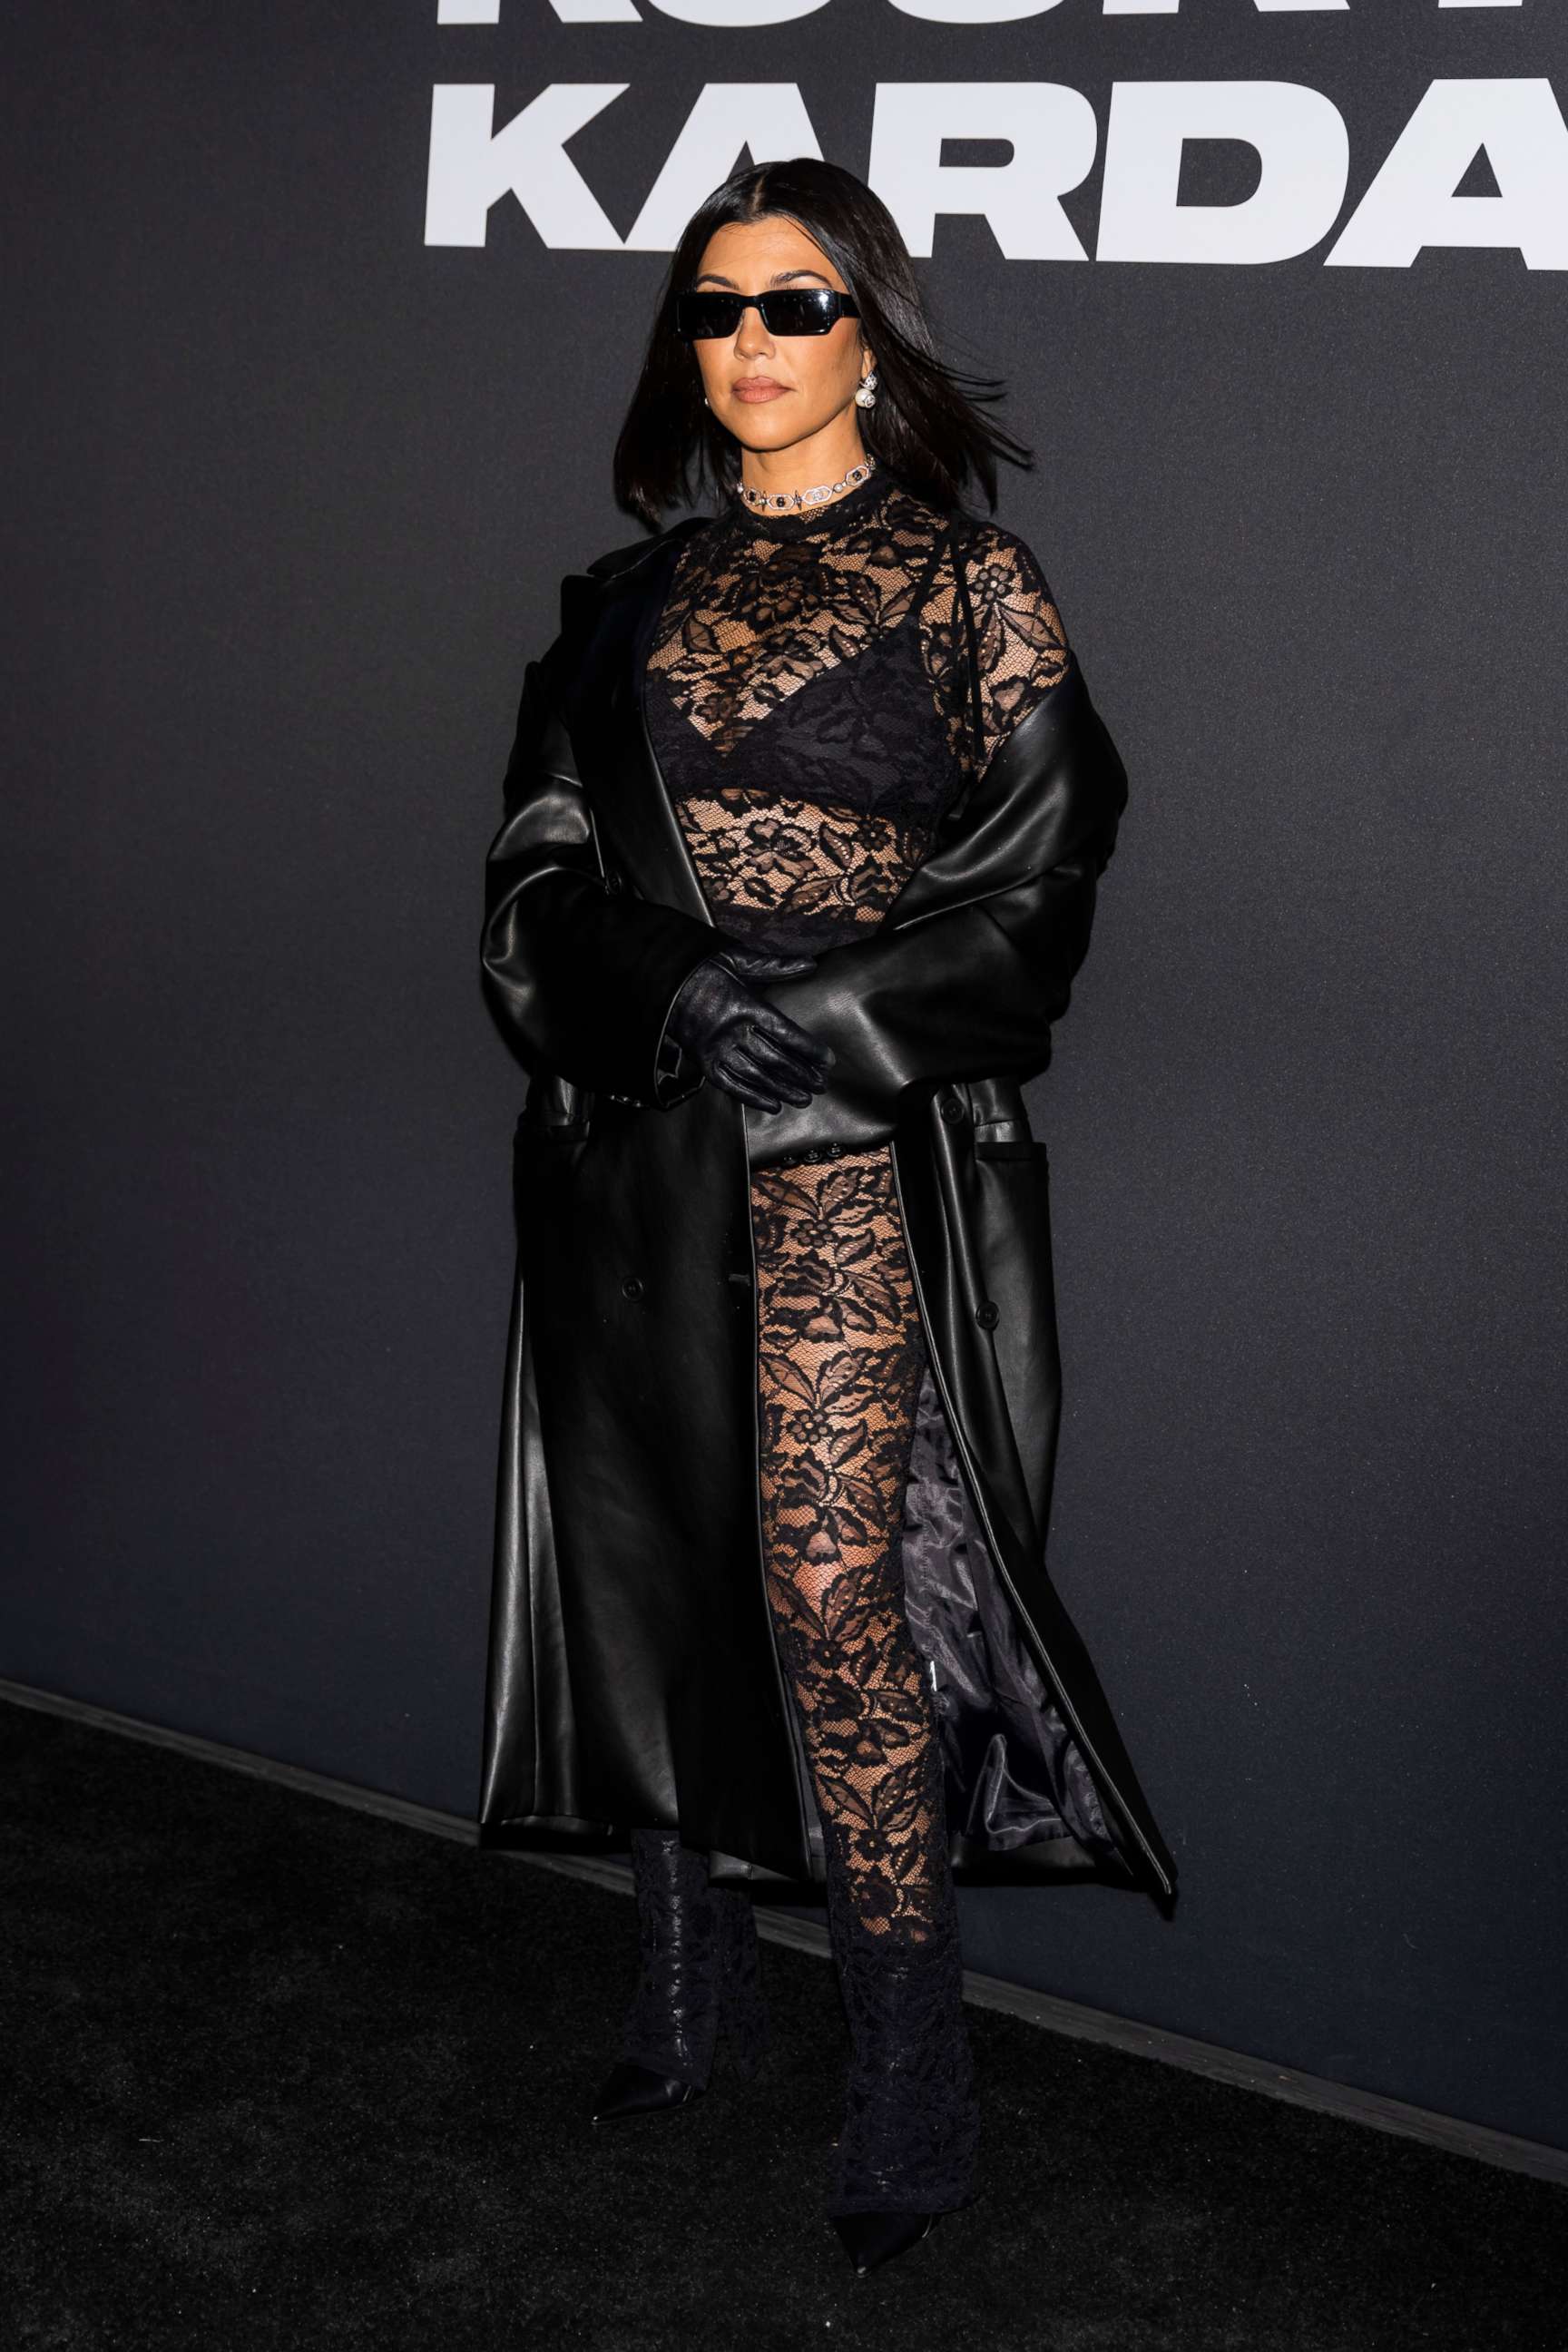 PHOTO: Kourtney Kardashian attends the Boohoo X Kourtney Kardashian fashion show during New York Fashion Week: The Shows on the High Line, Sept. 13, 2022, in New York City.